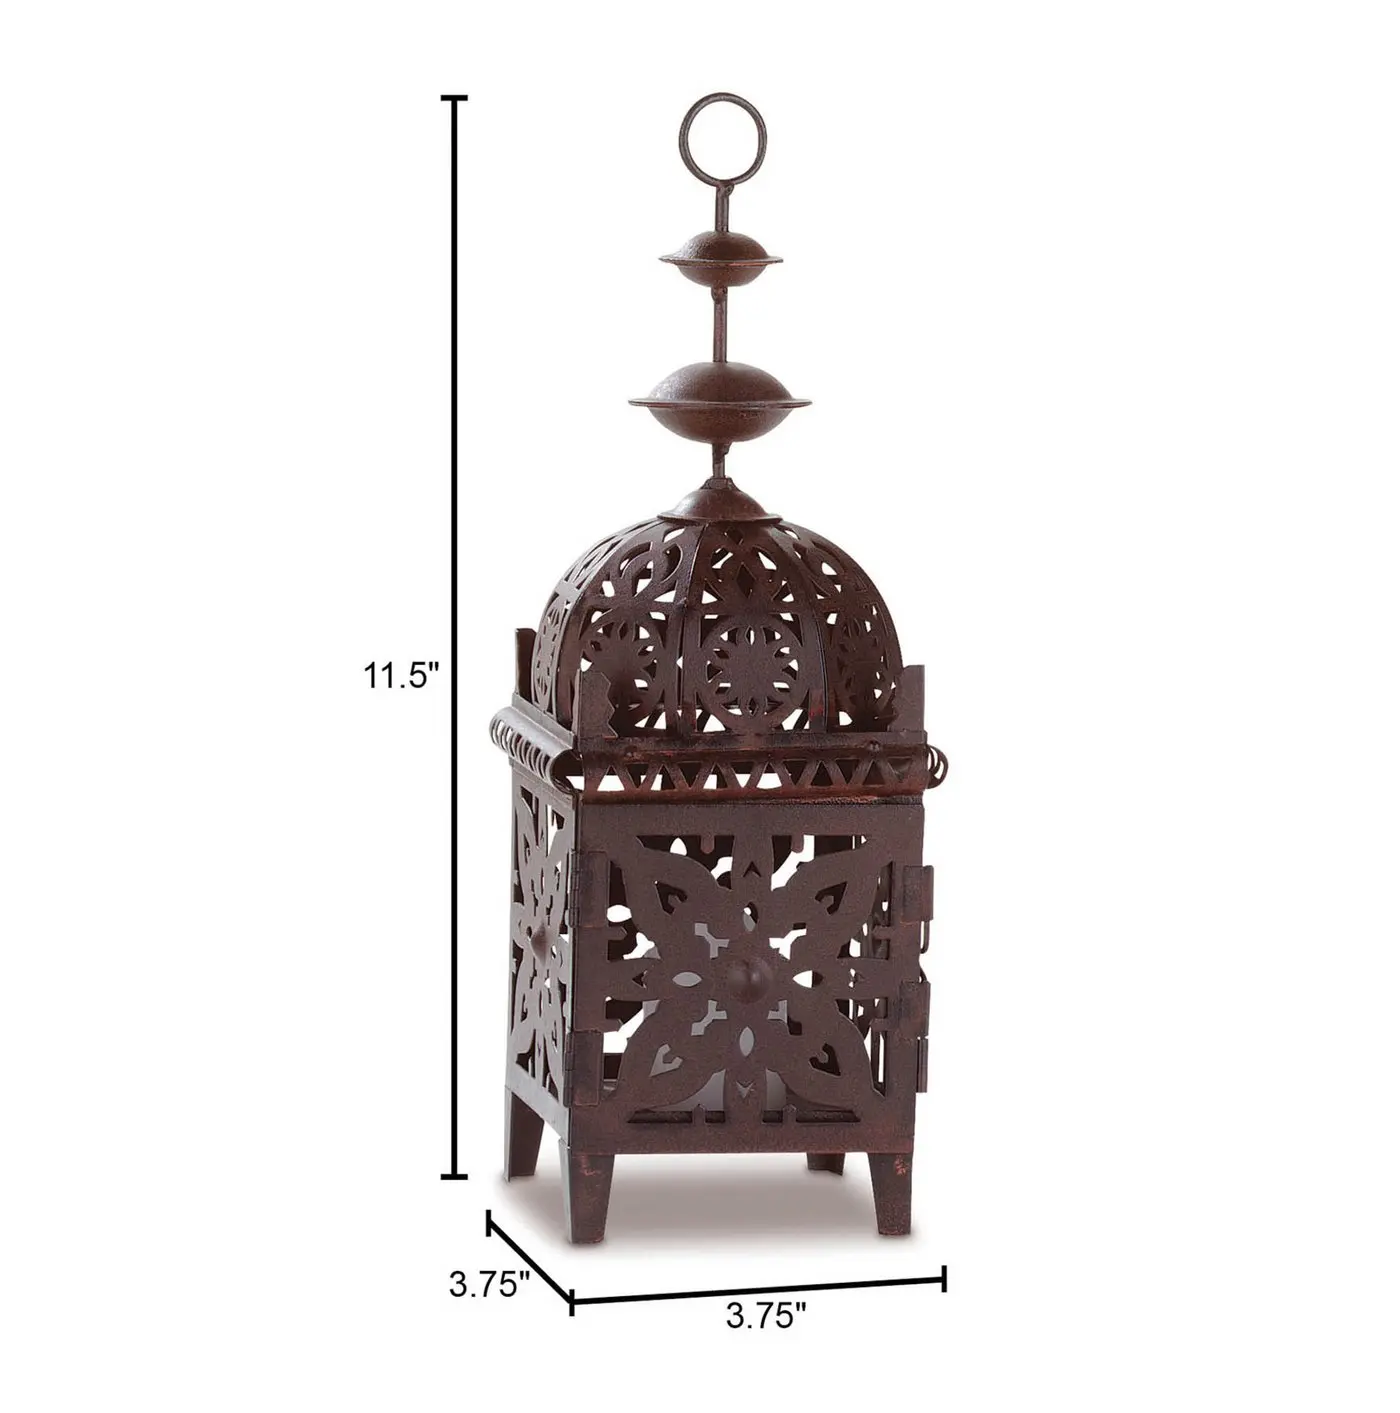 

Accent Plus Iron Ornate Black Cutout Focal and Moroccan Ornate Cutouts Metalwork Candle Lantern Decor - 11.5 inches